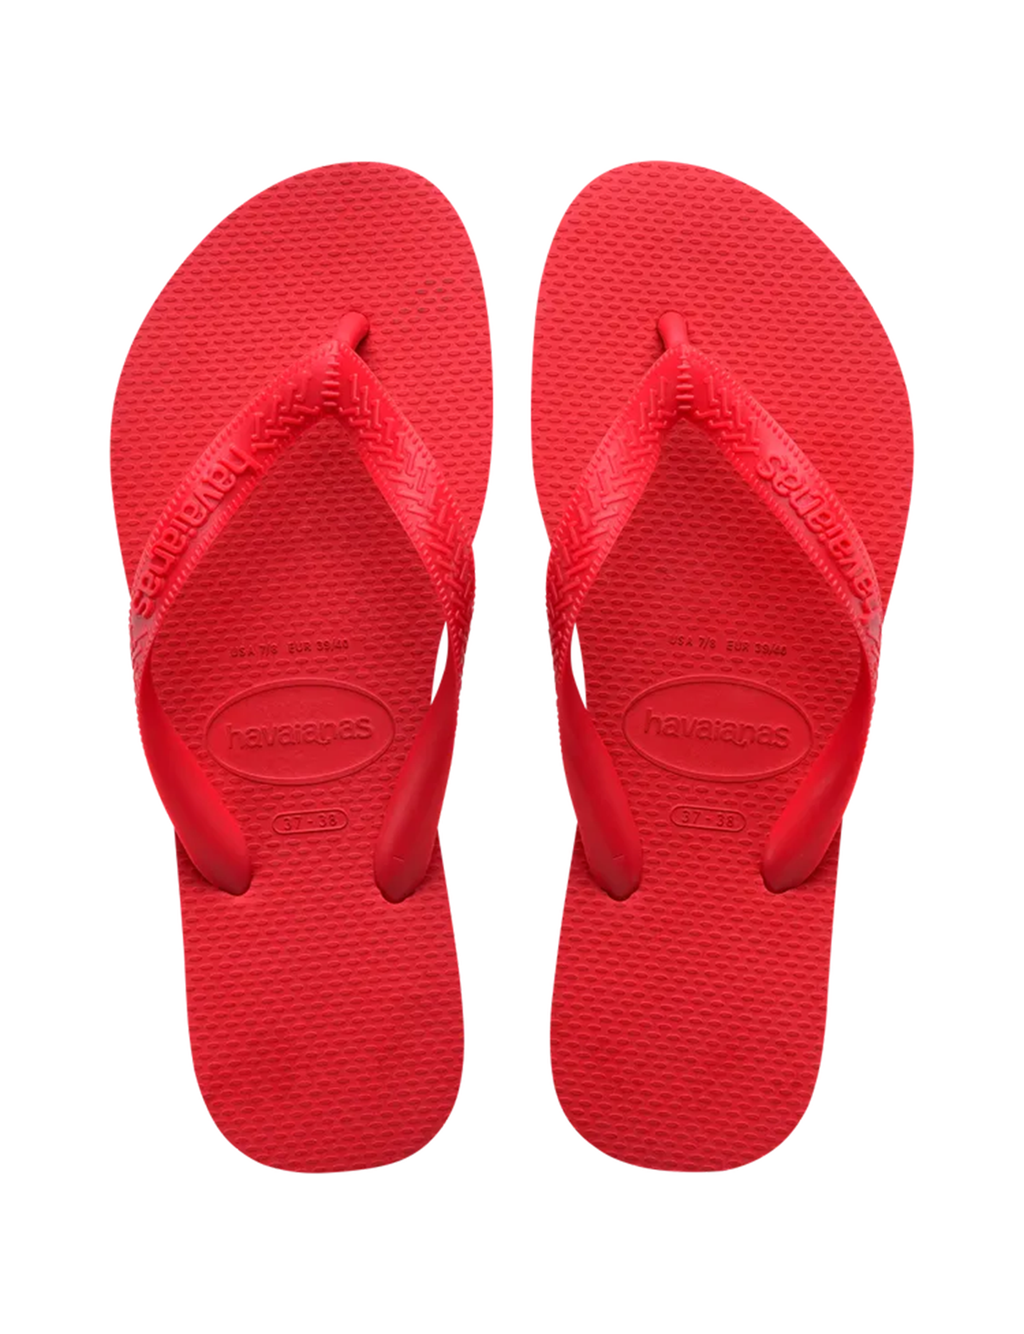 Top Sandal, Ruby Red